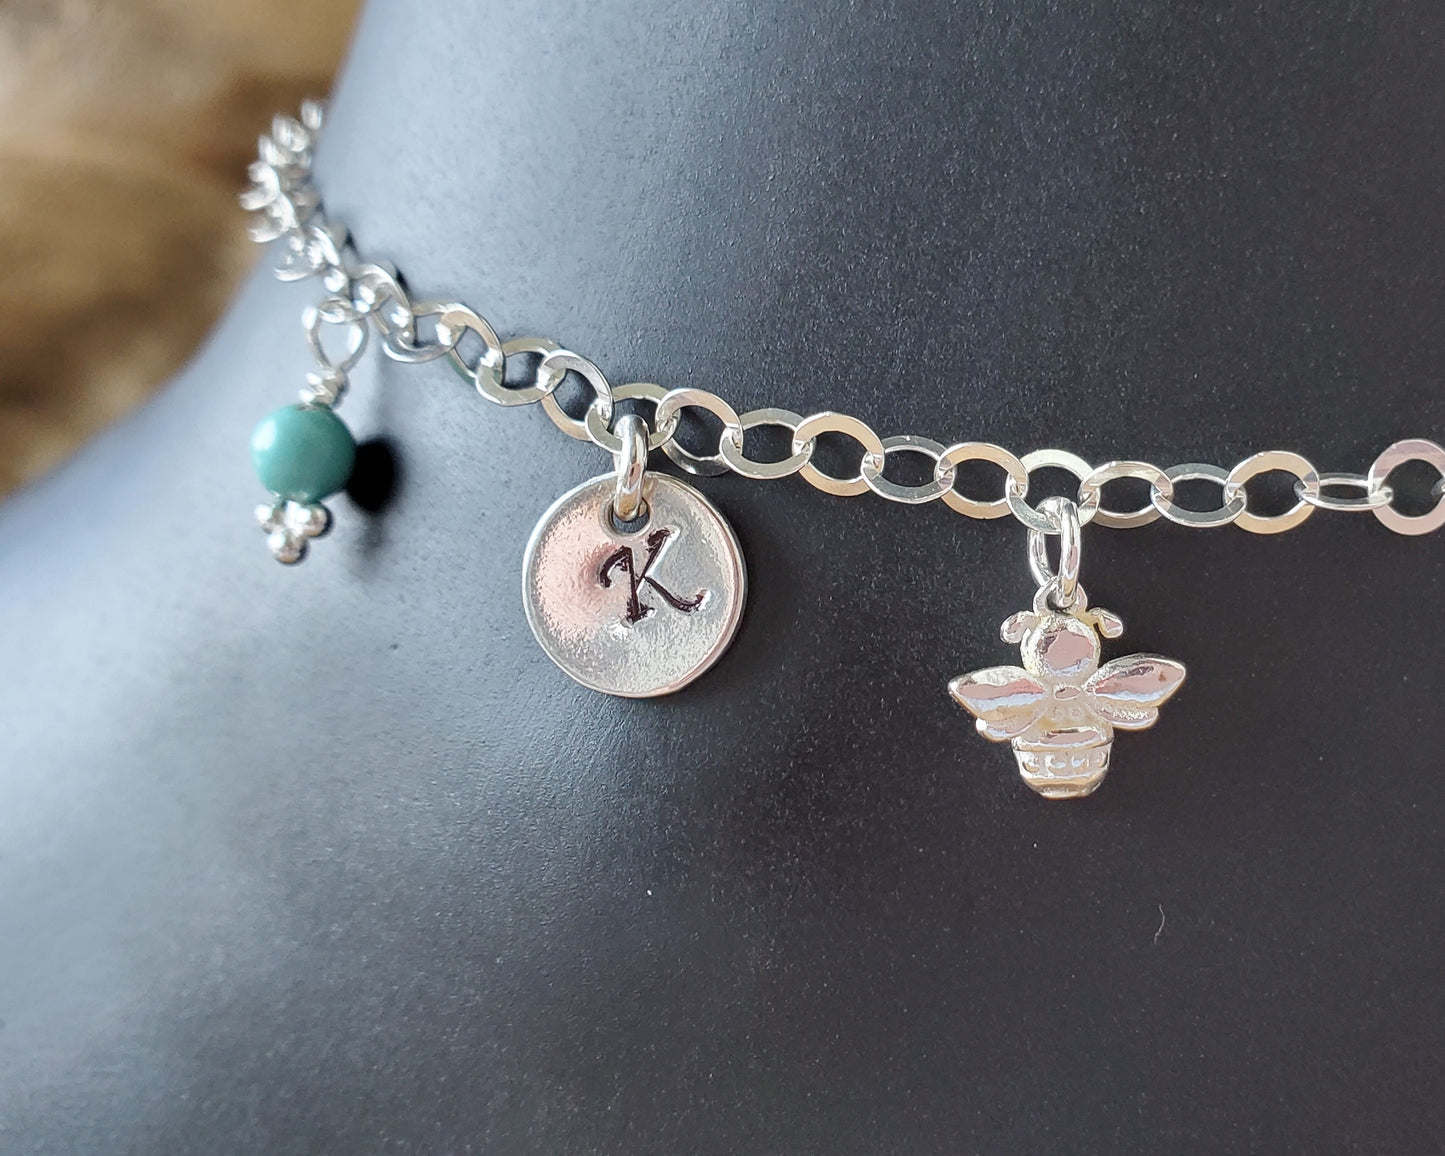 Deluxe Personalized Bee Initial Birthstone Anklet, Ankle Bracelet, Bee Bracelet